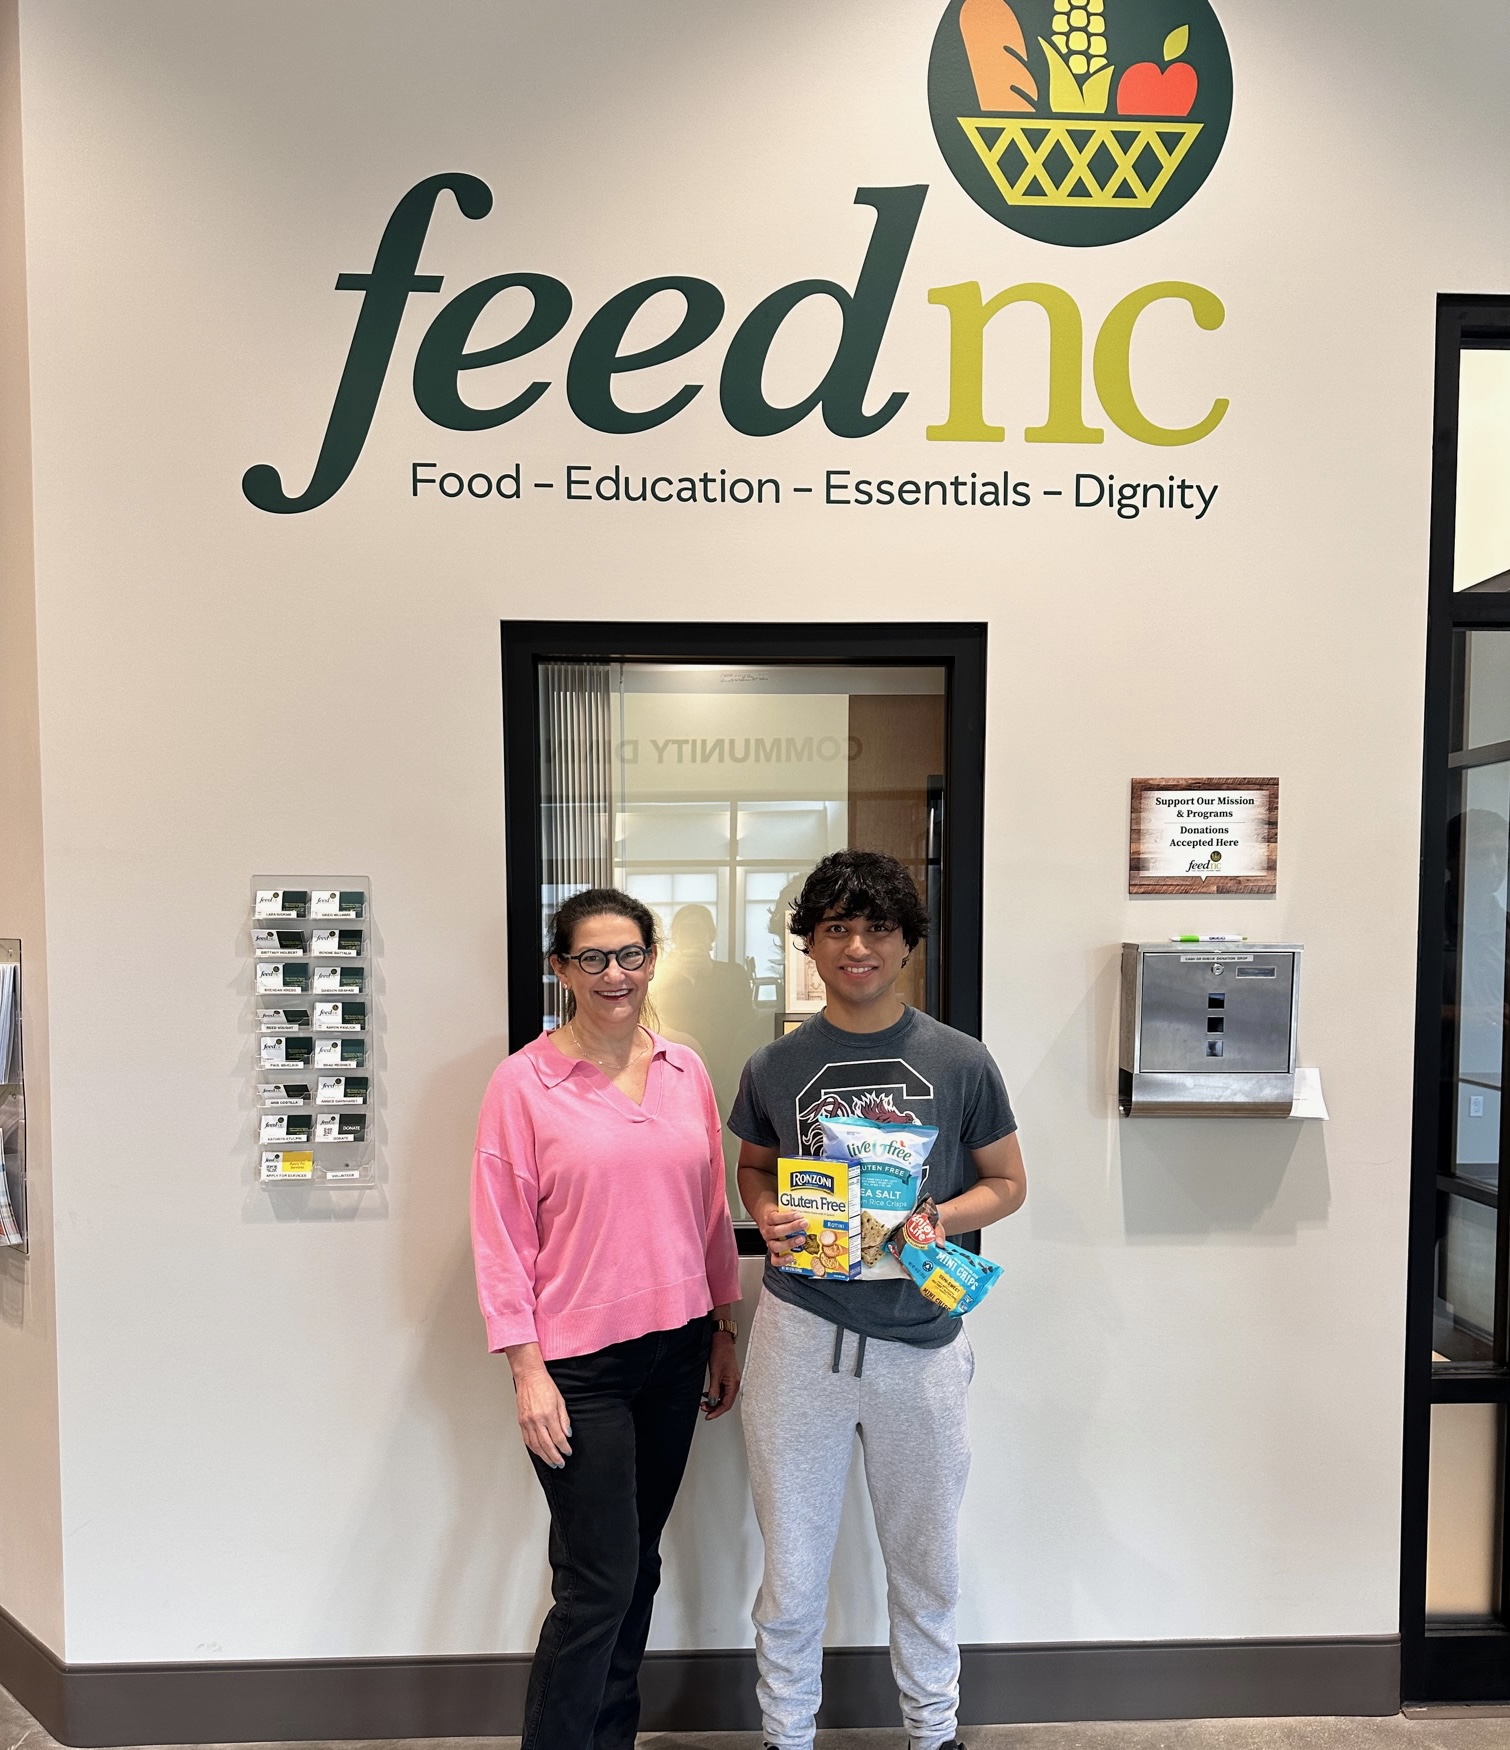 Food donation drop off at FeedNC after a FOODiversity outreach event for the food pantry members